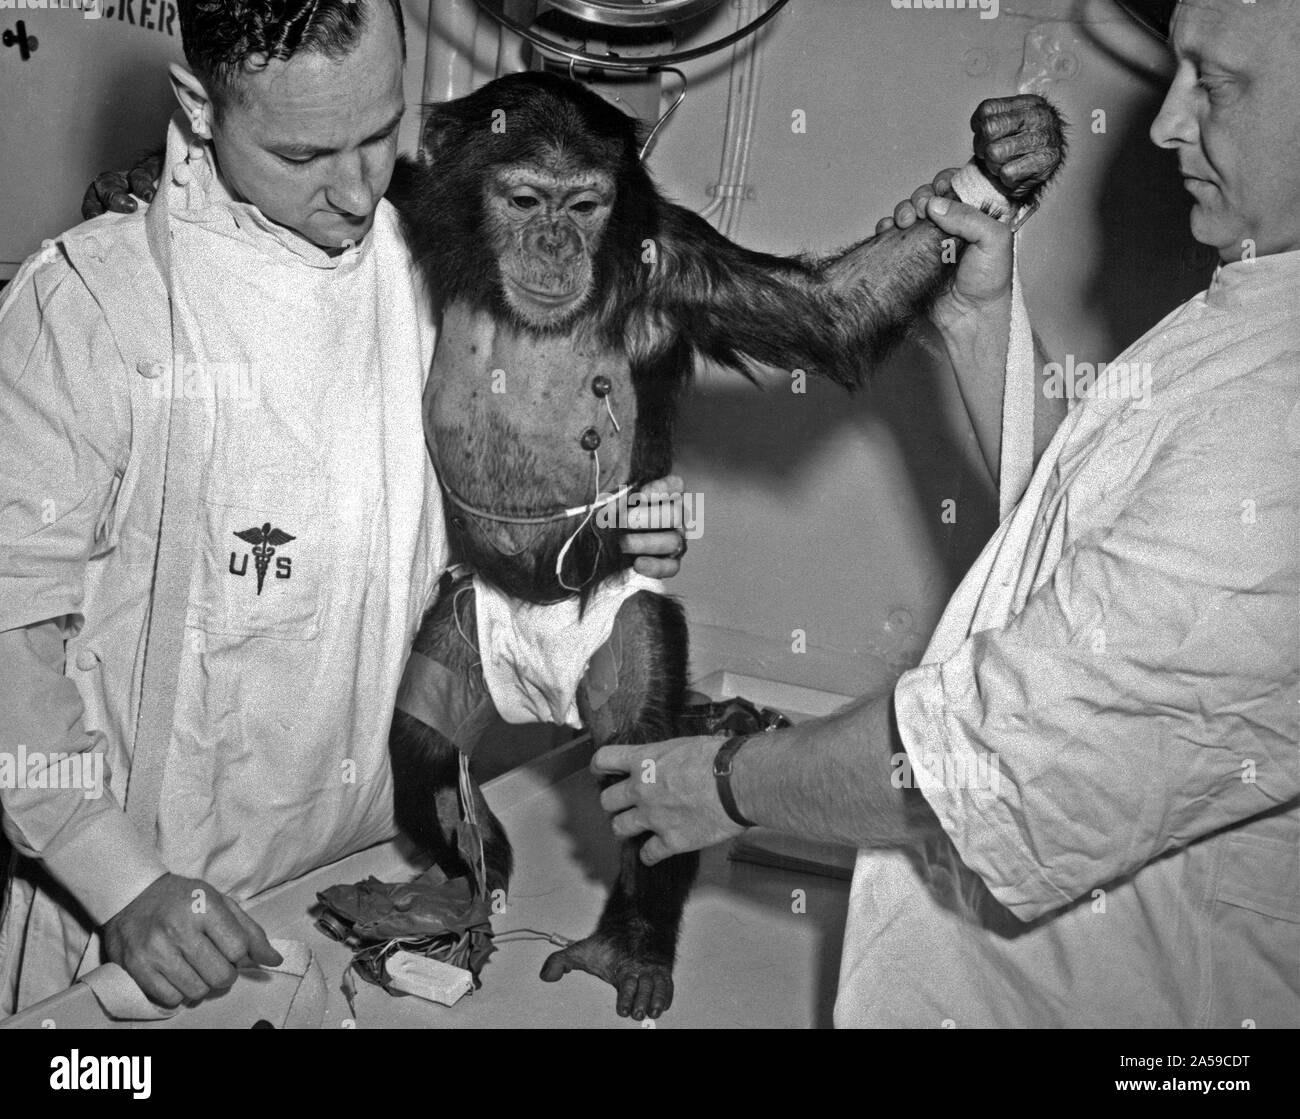 (31 Jan. 1961) --- Chimpanzee 'Ham' with bio-sensors attached to his body is readied by handlers for his trip in the Mercury-Redstone 2 (MR-2) spacecraft. Stock Photo